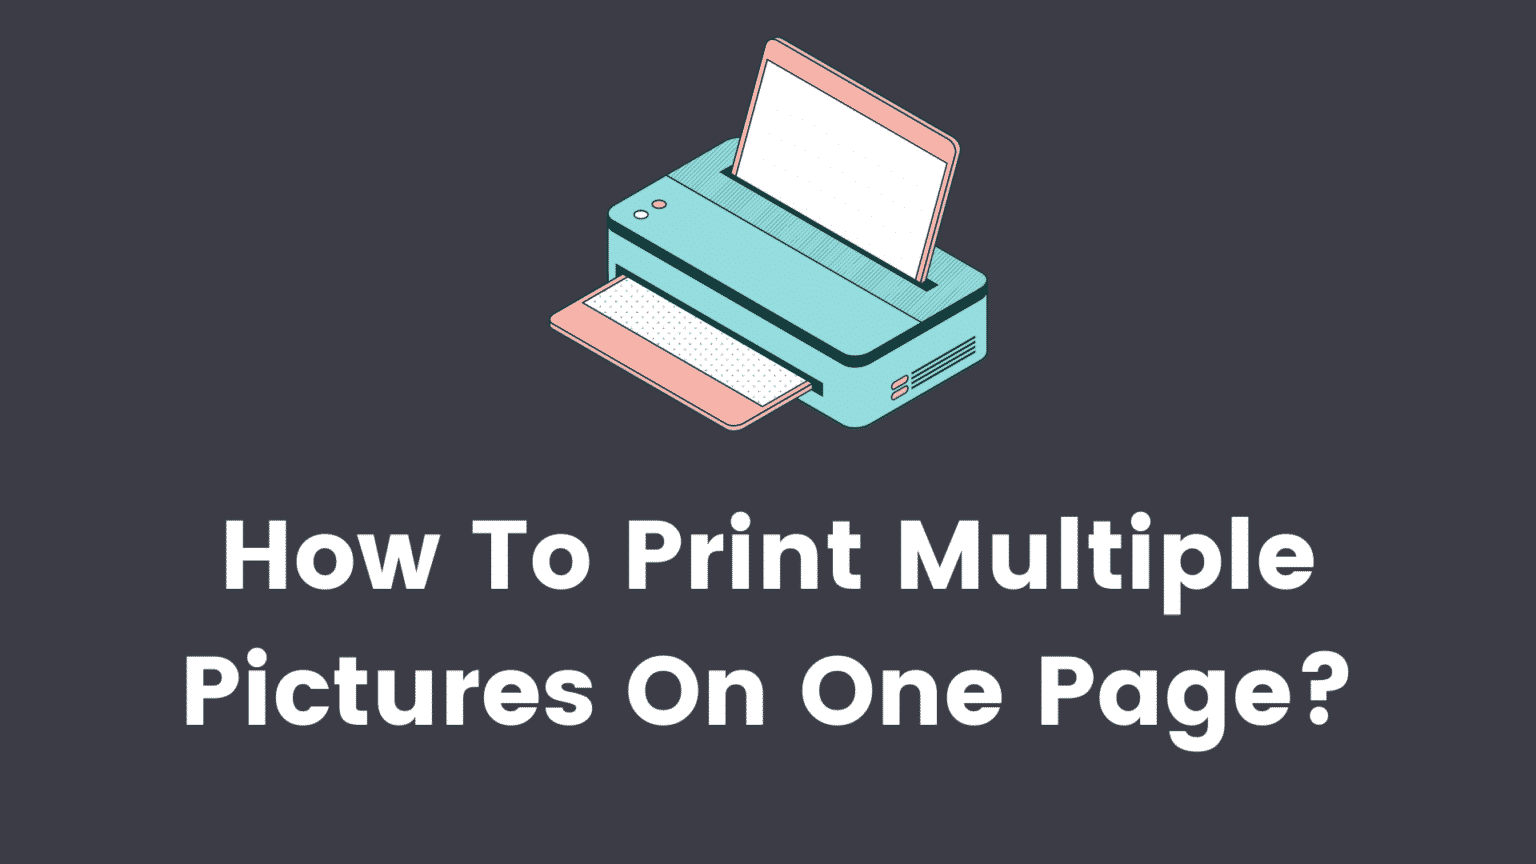 how-to-print-multiple-pictures-on-one-page-in-windows-10